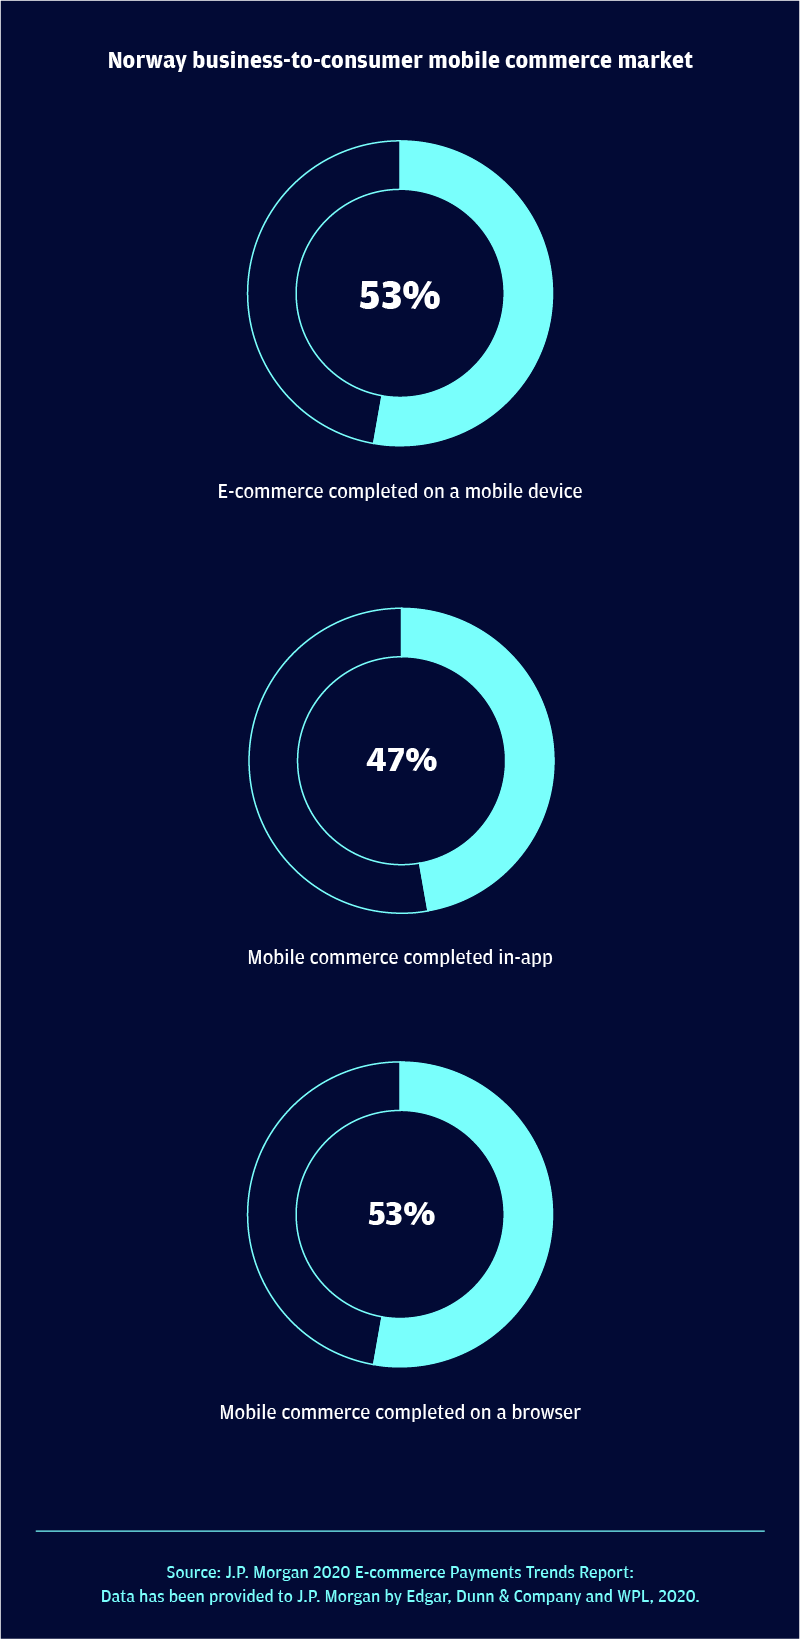 Norway business-to-consumer mobile commerce market